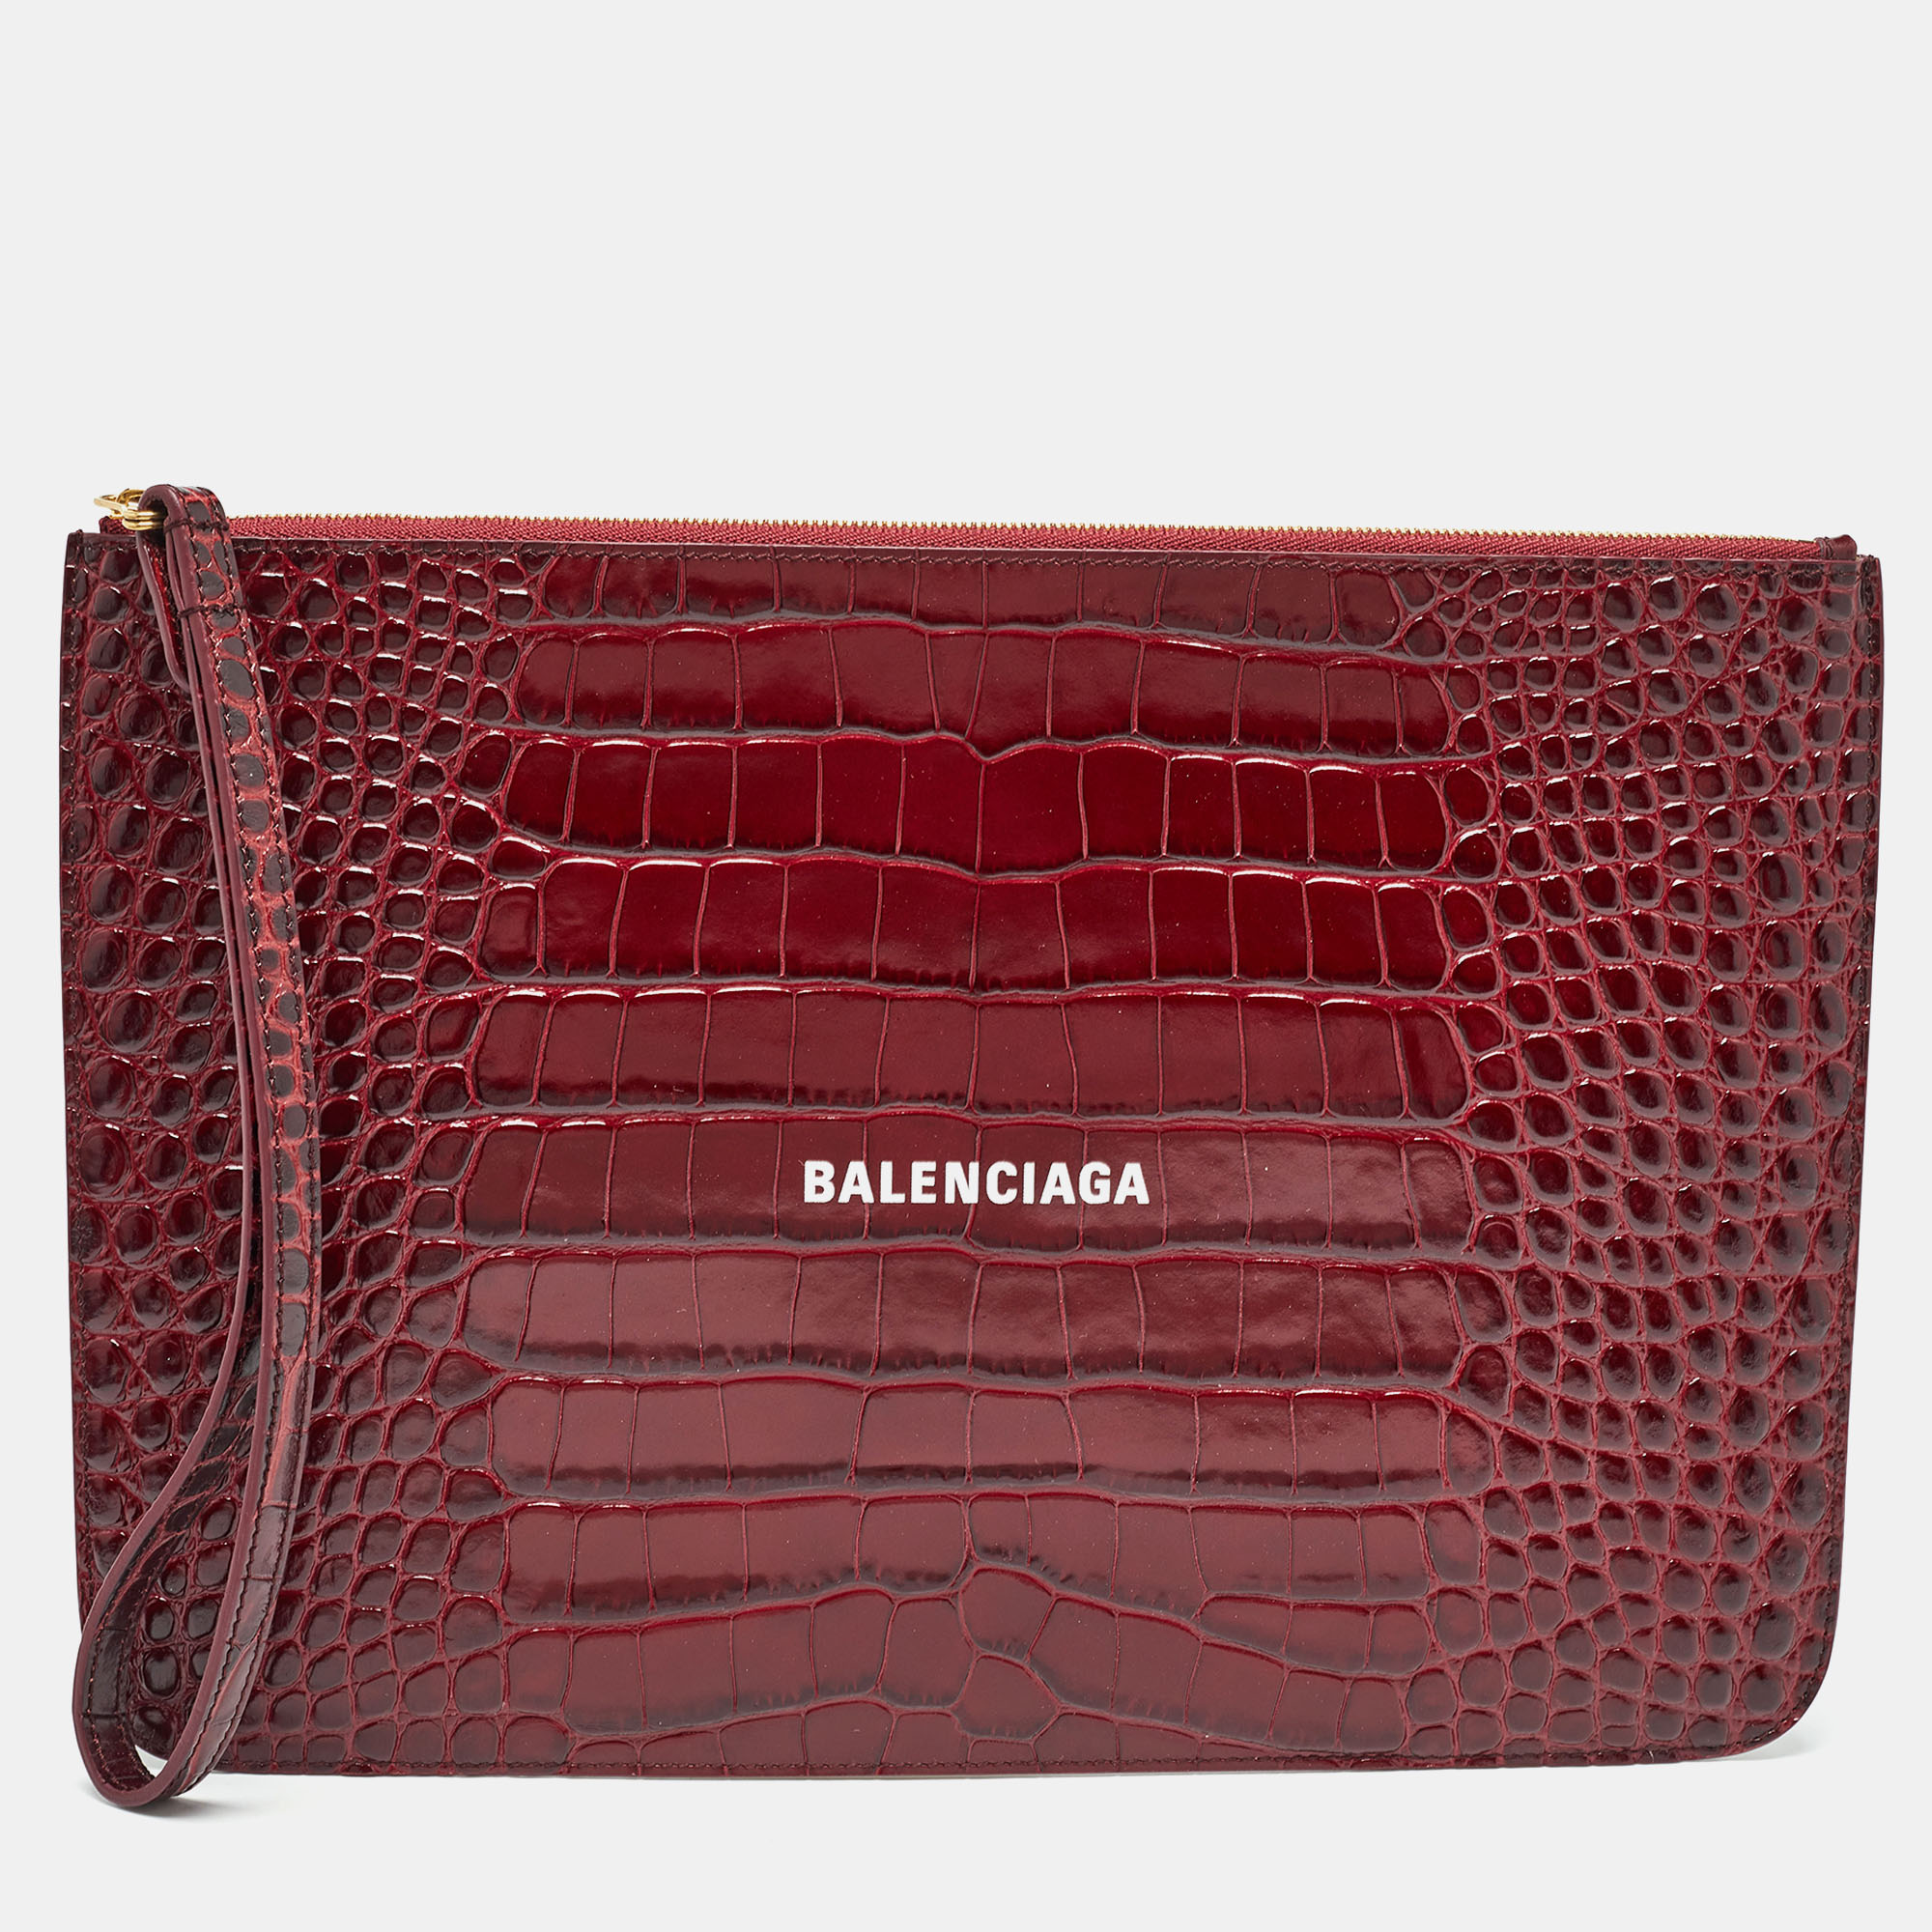 

Balenciaga Red Croc Embossed Leather Flat Zip Pouch